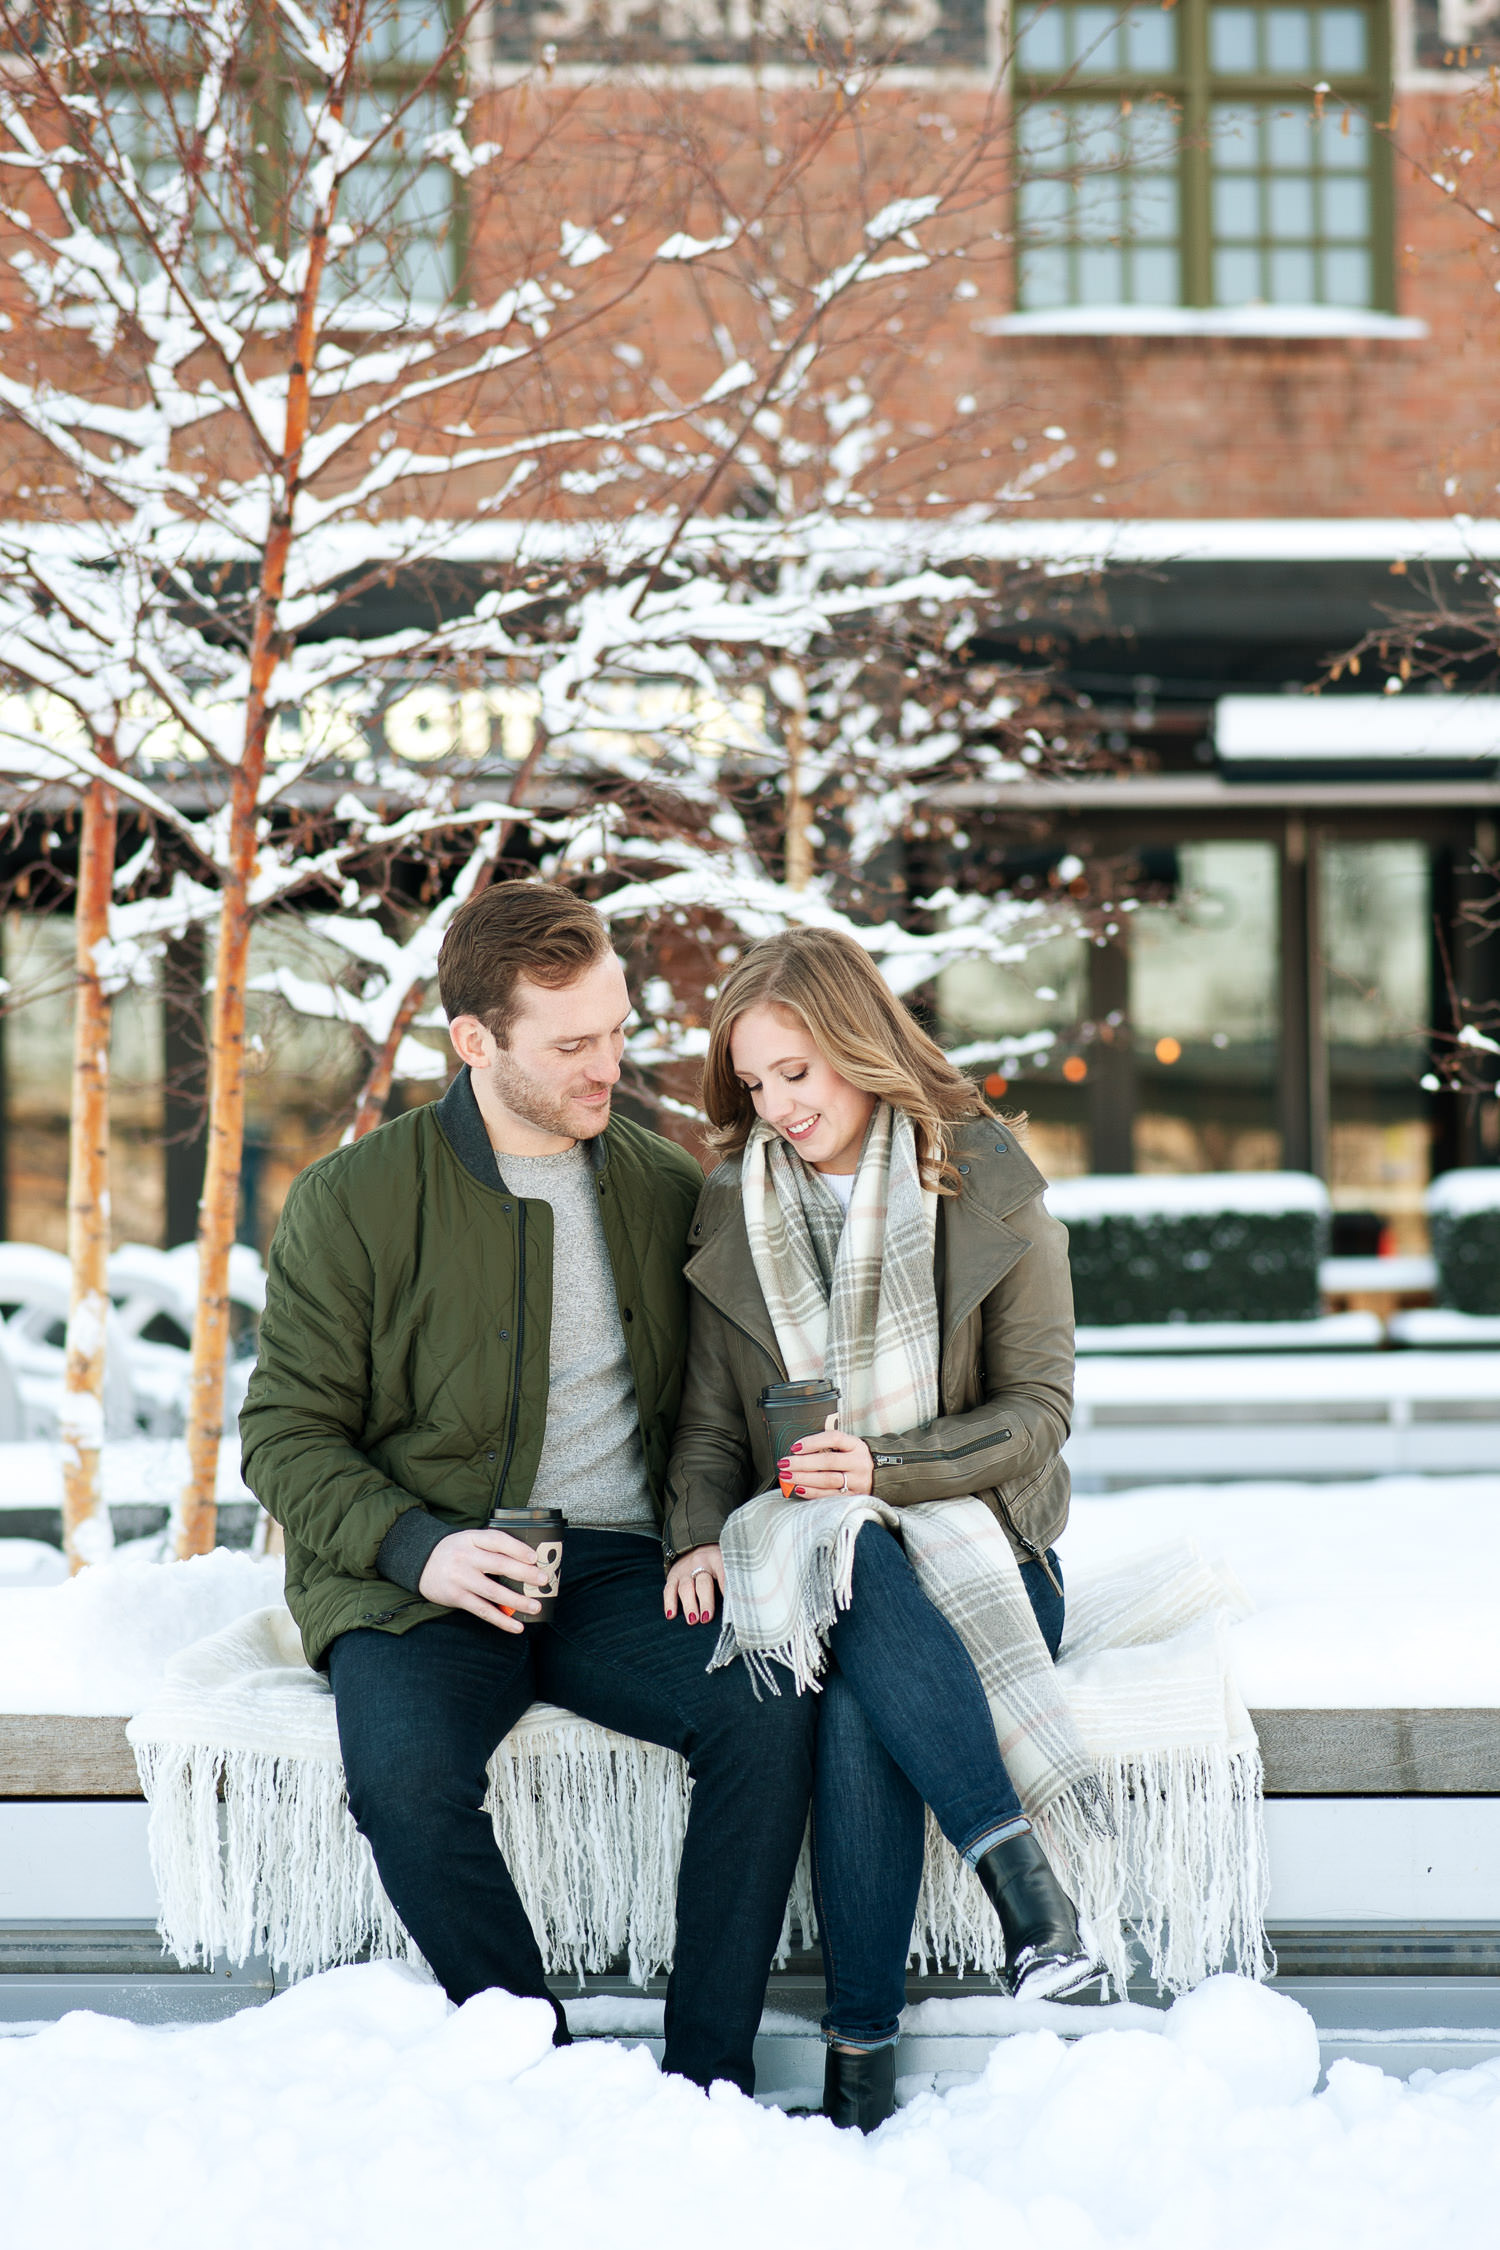 Couple share at hot coffee at their winter engagement session captured by Tara Whittaker Photography